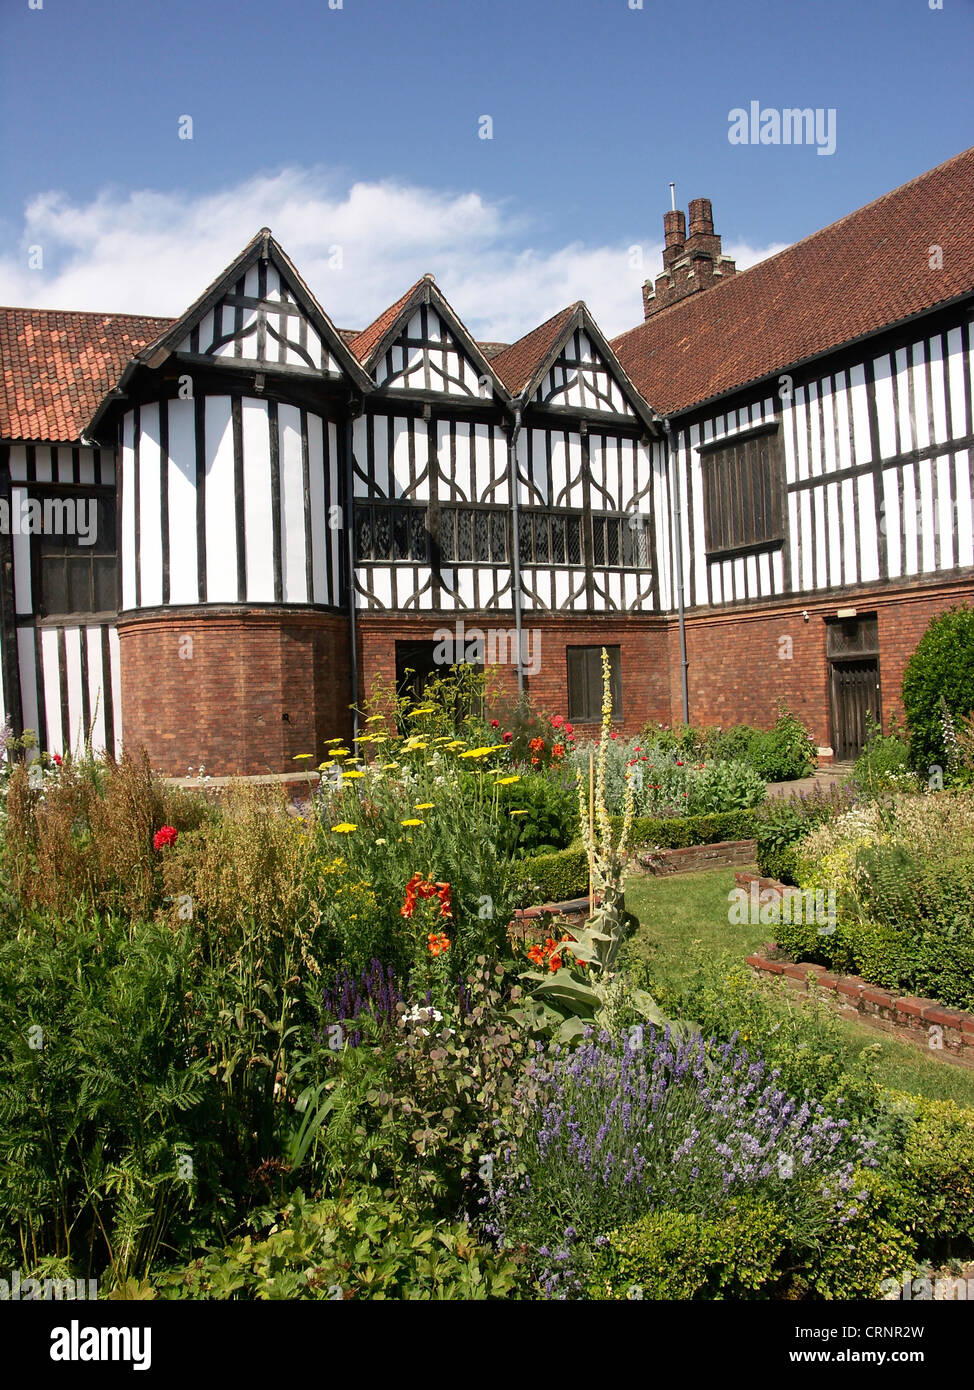 The Gainsborough Old Hall, a unique medieval manor house built by Sir Thomas Burgh in the 15th century. Stock Photo